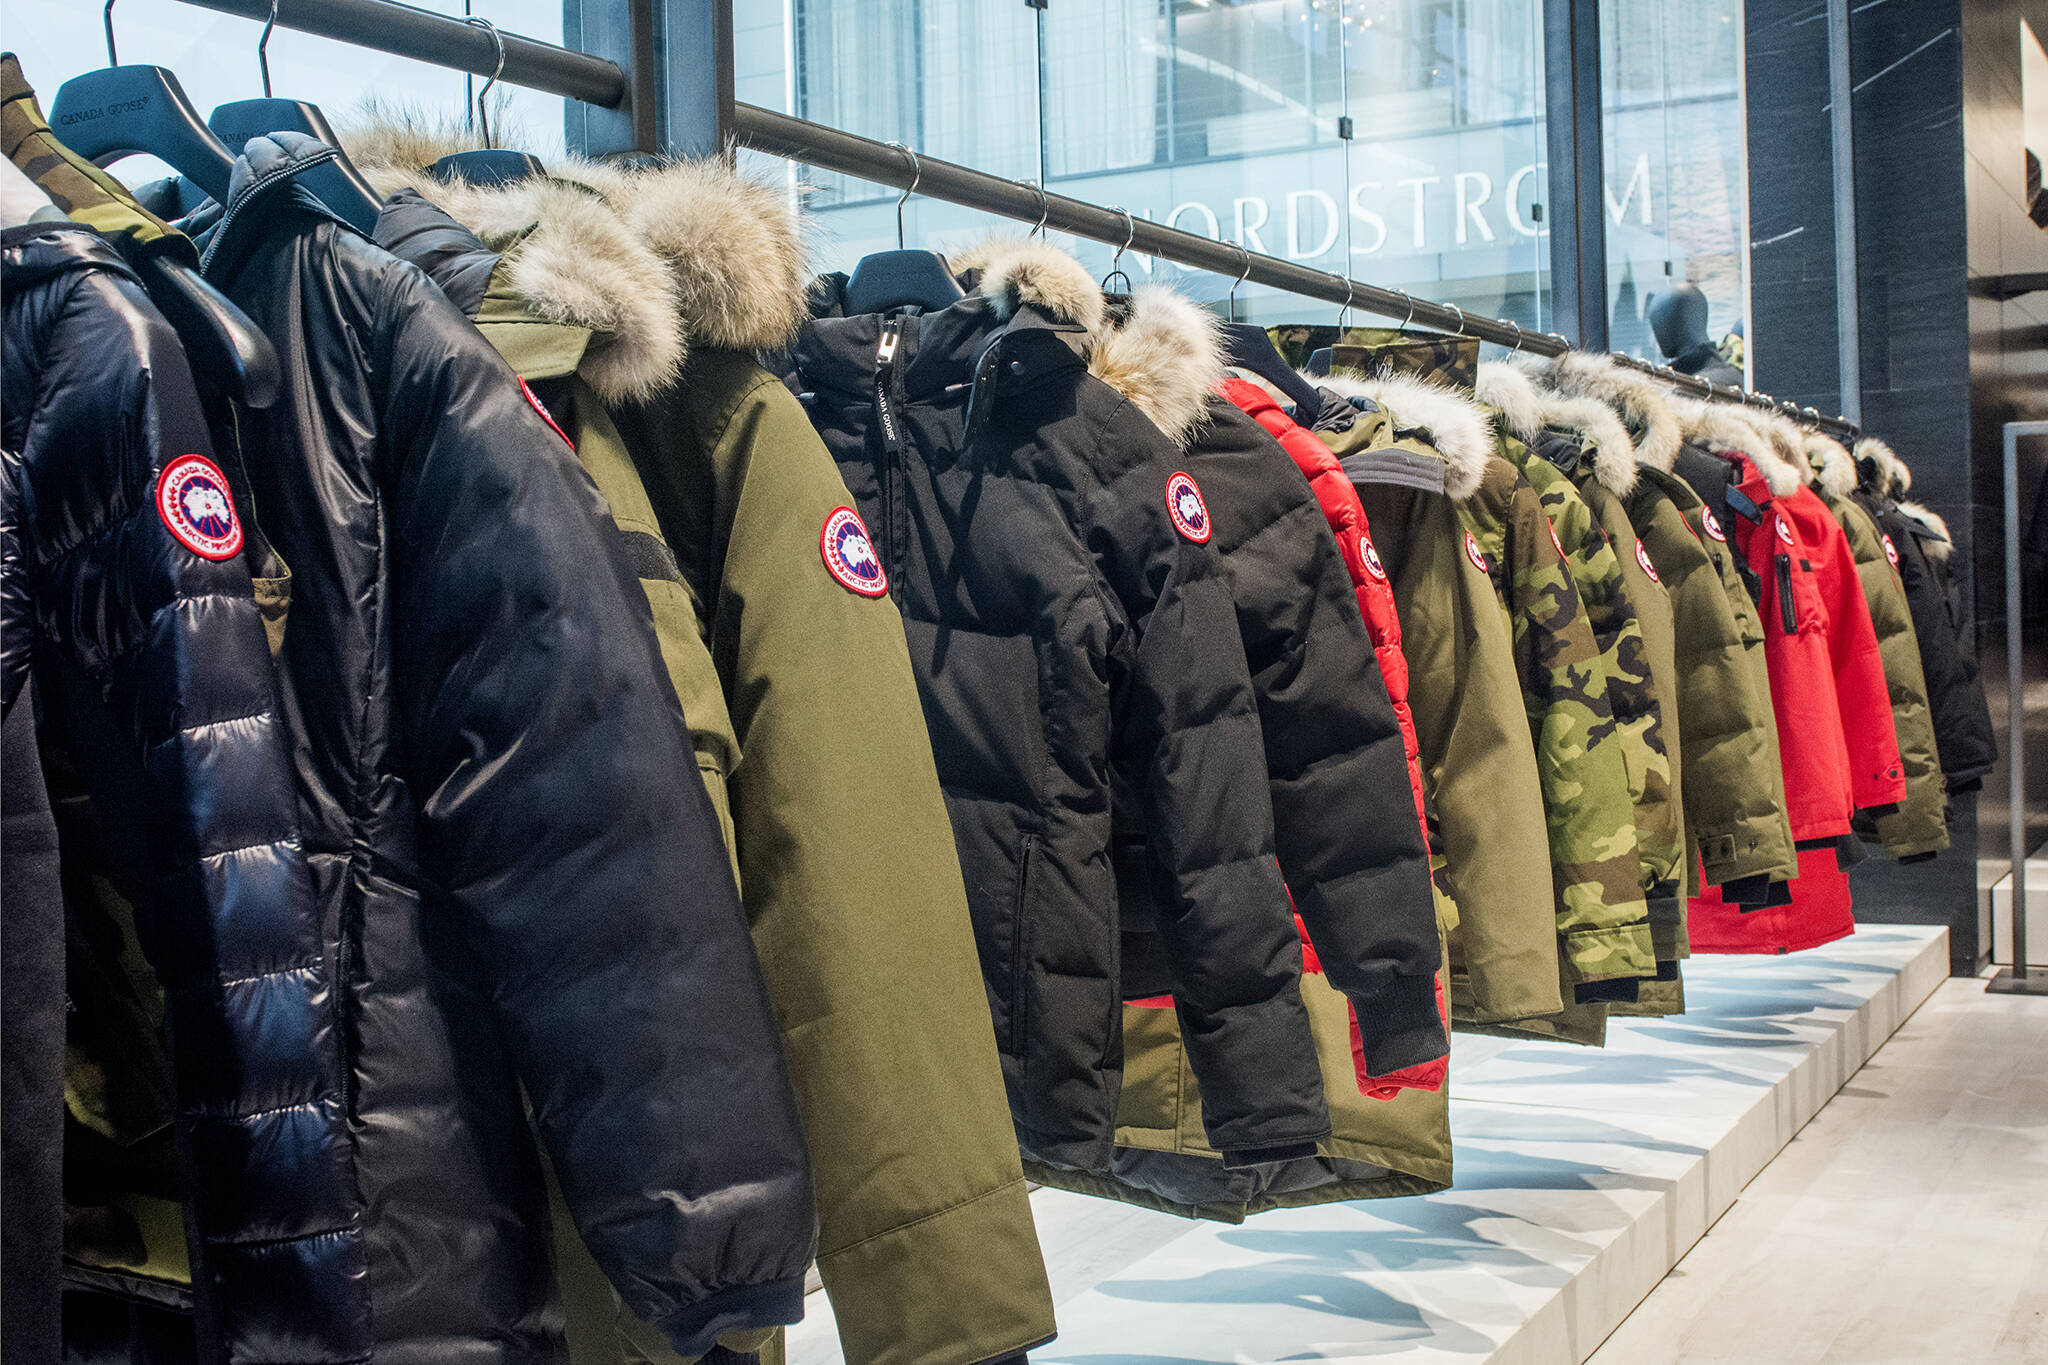 Canada Goose says it will no longer use fur in its products